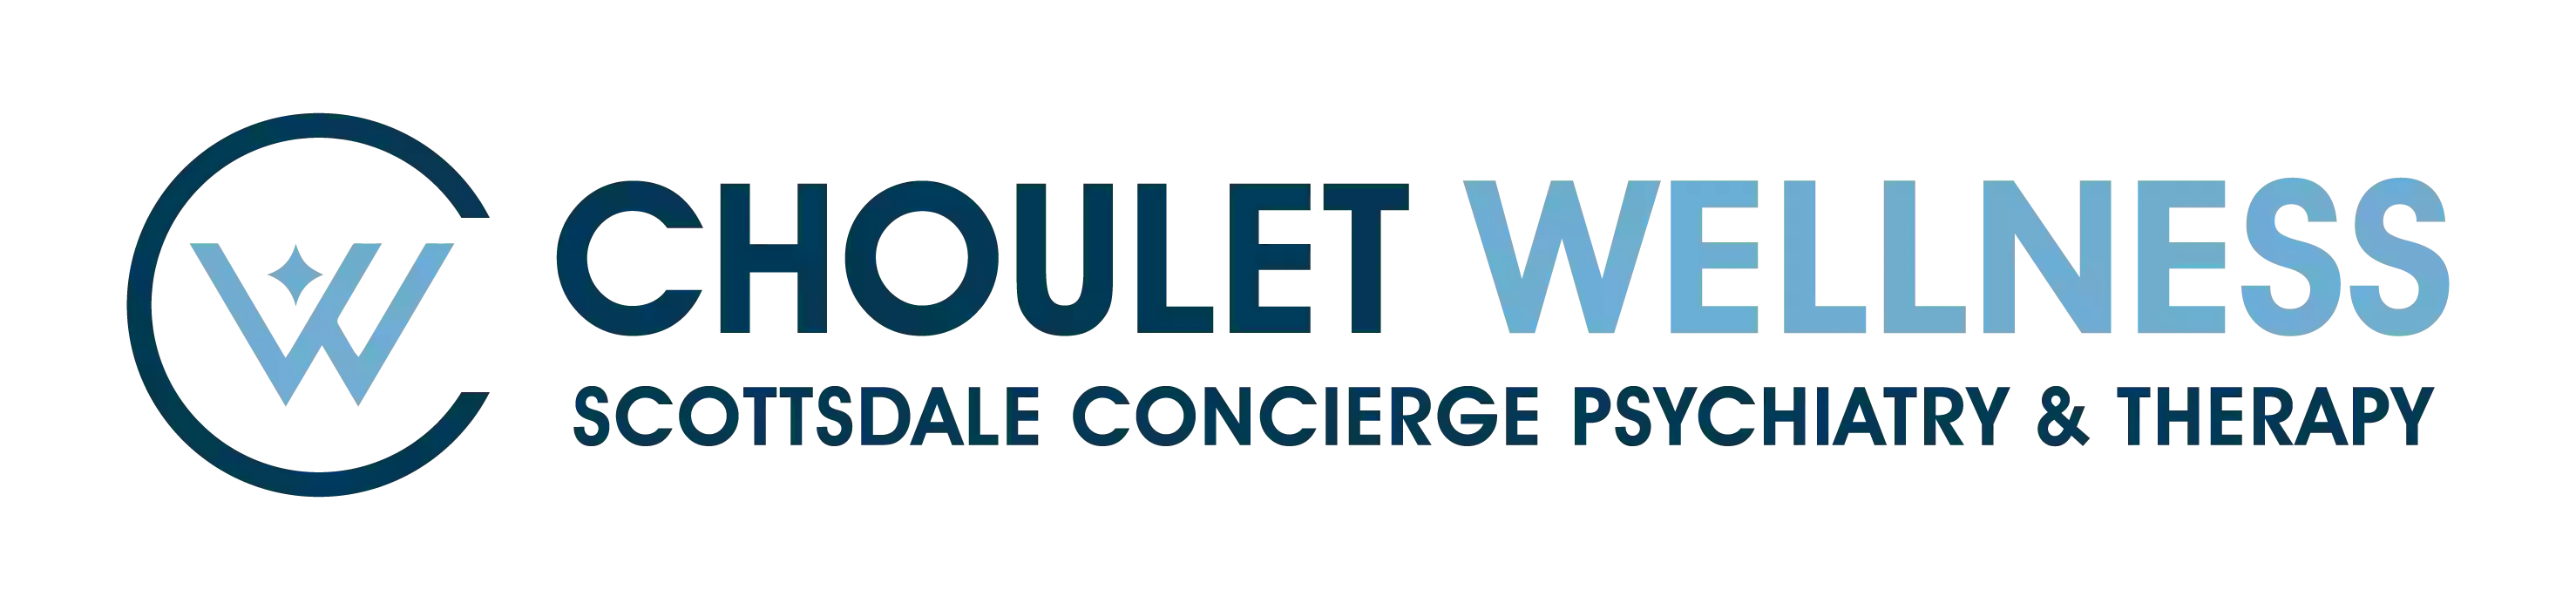 Choulet Wellness: Scottsdale Concierge Psychiatry & Therapy (Gilbert)